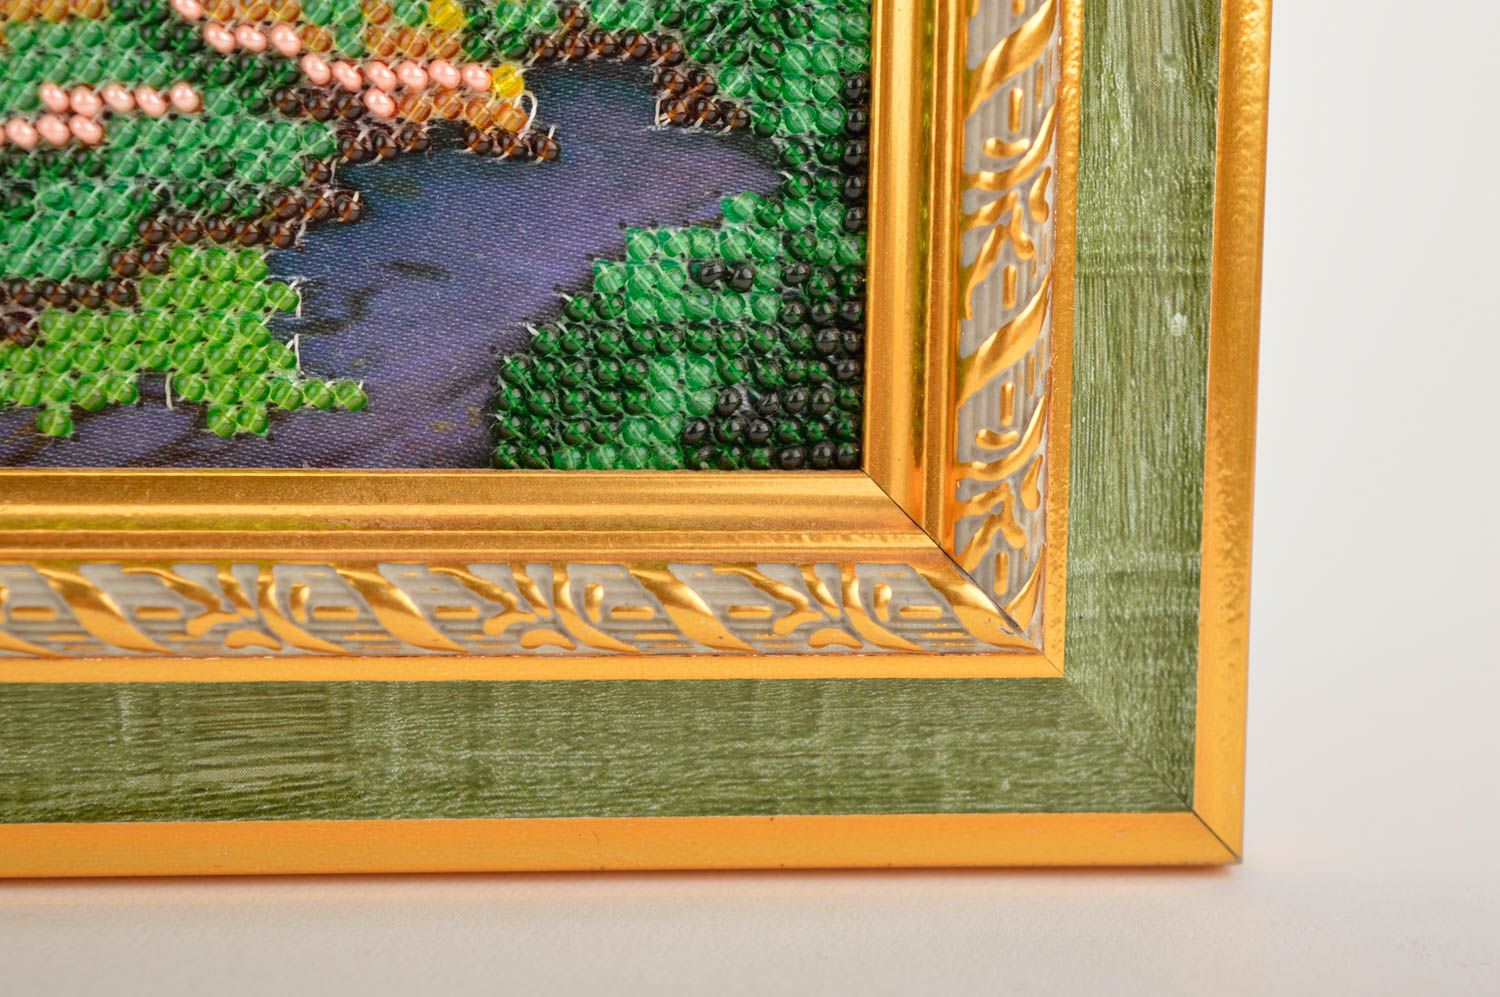 Unusual handmade bead embroidery cool rooms modern art decorative use only photo 5